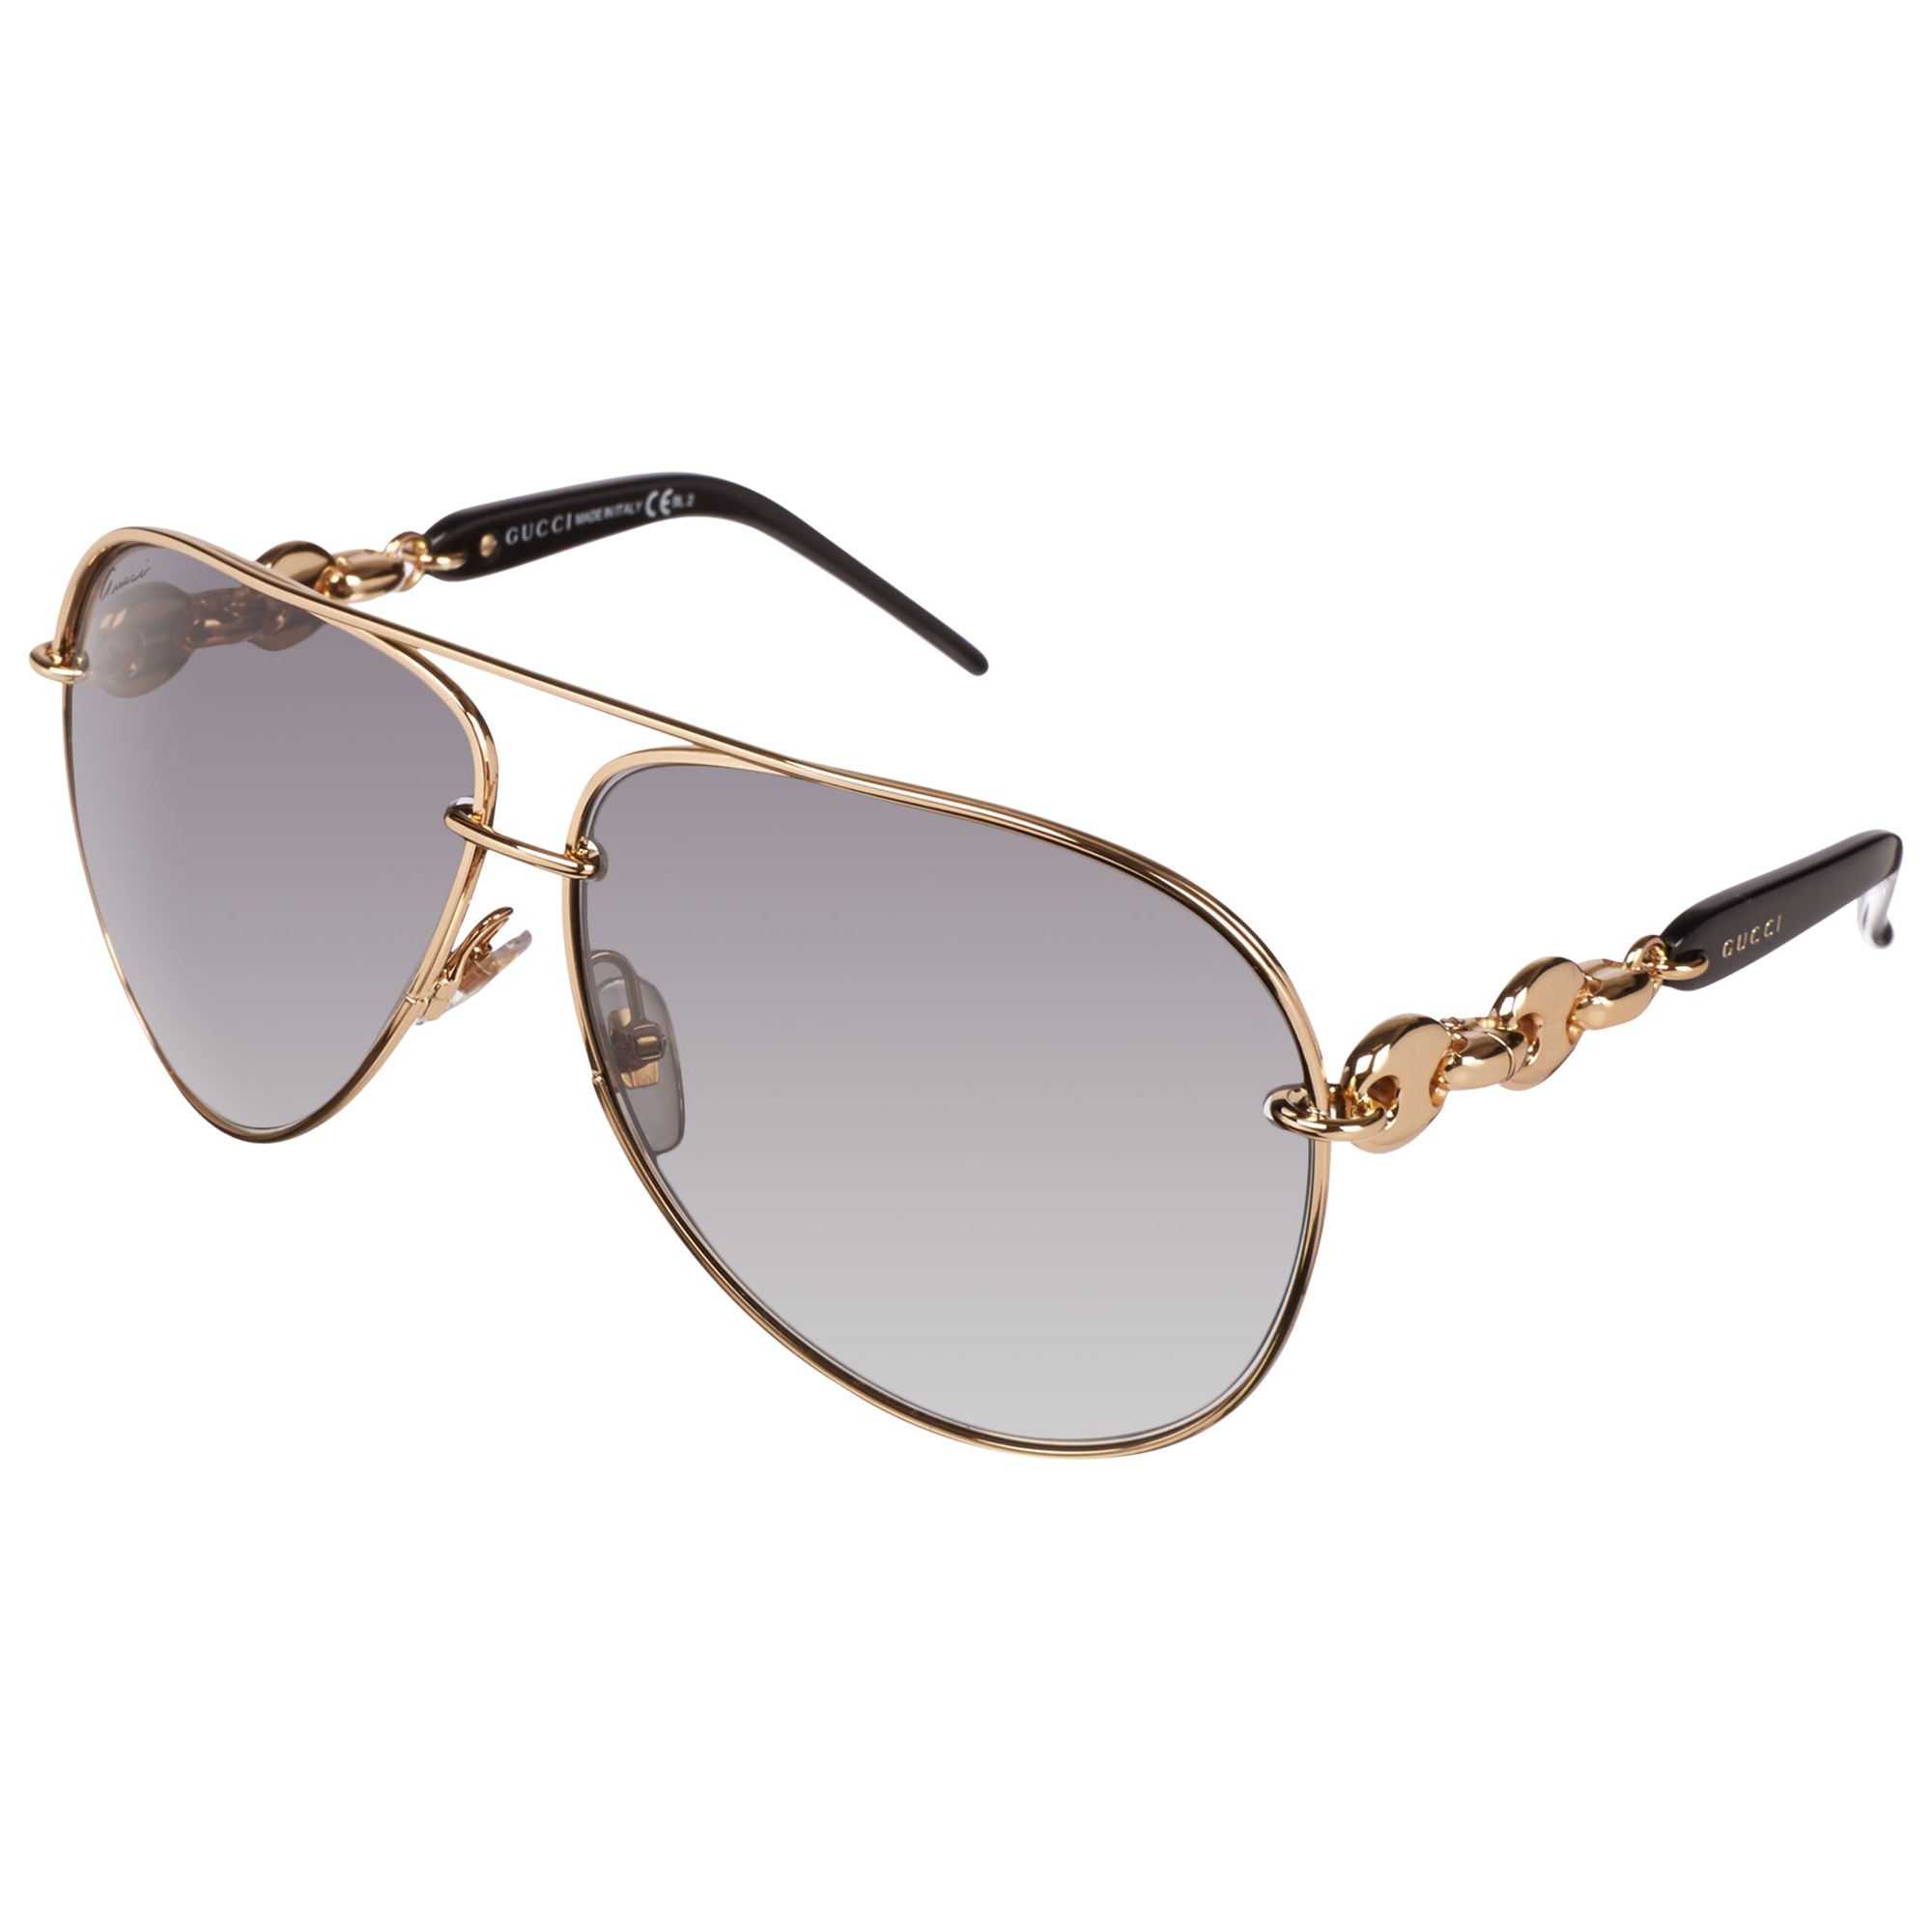 Gucci Gc4225 S Aviator Sunglasses Brown At John Lewis And Partners